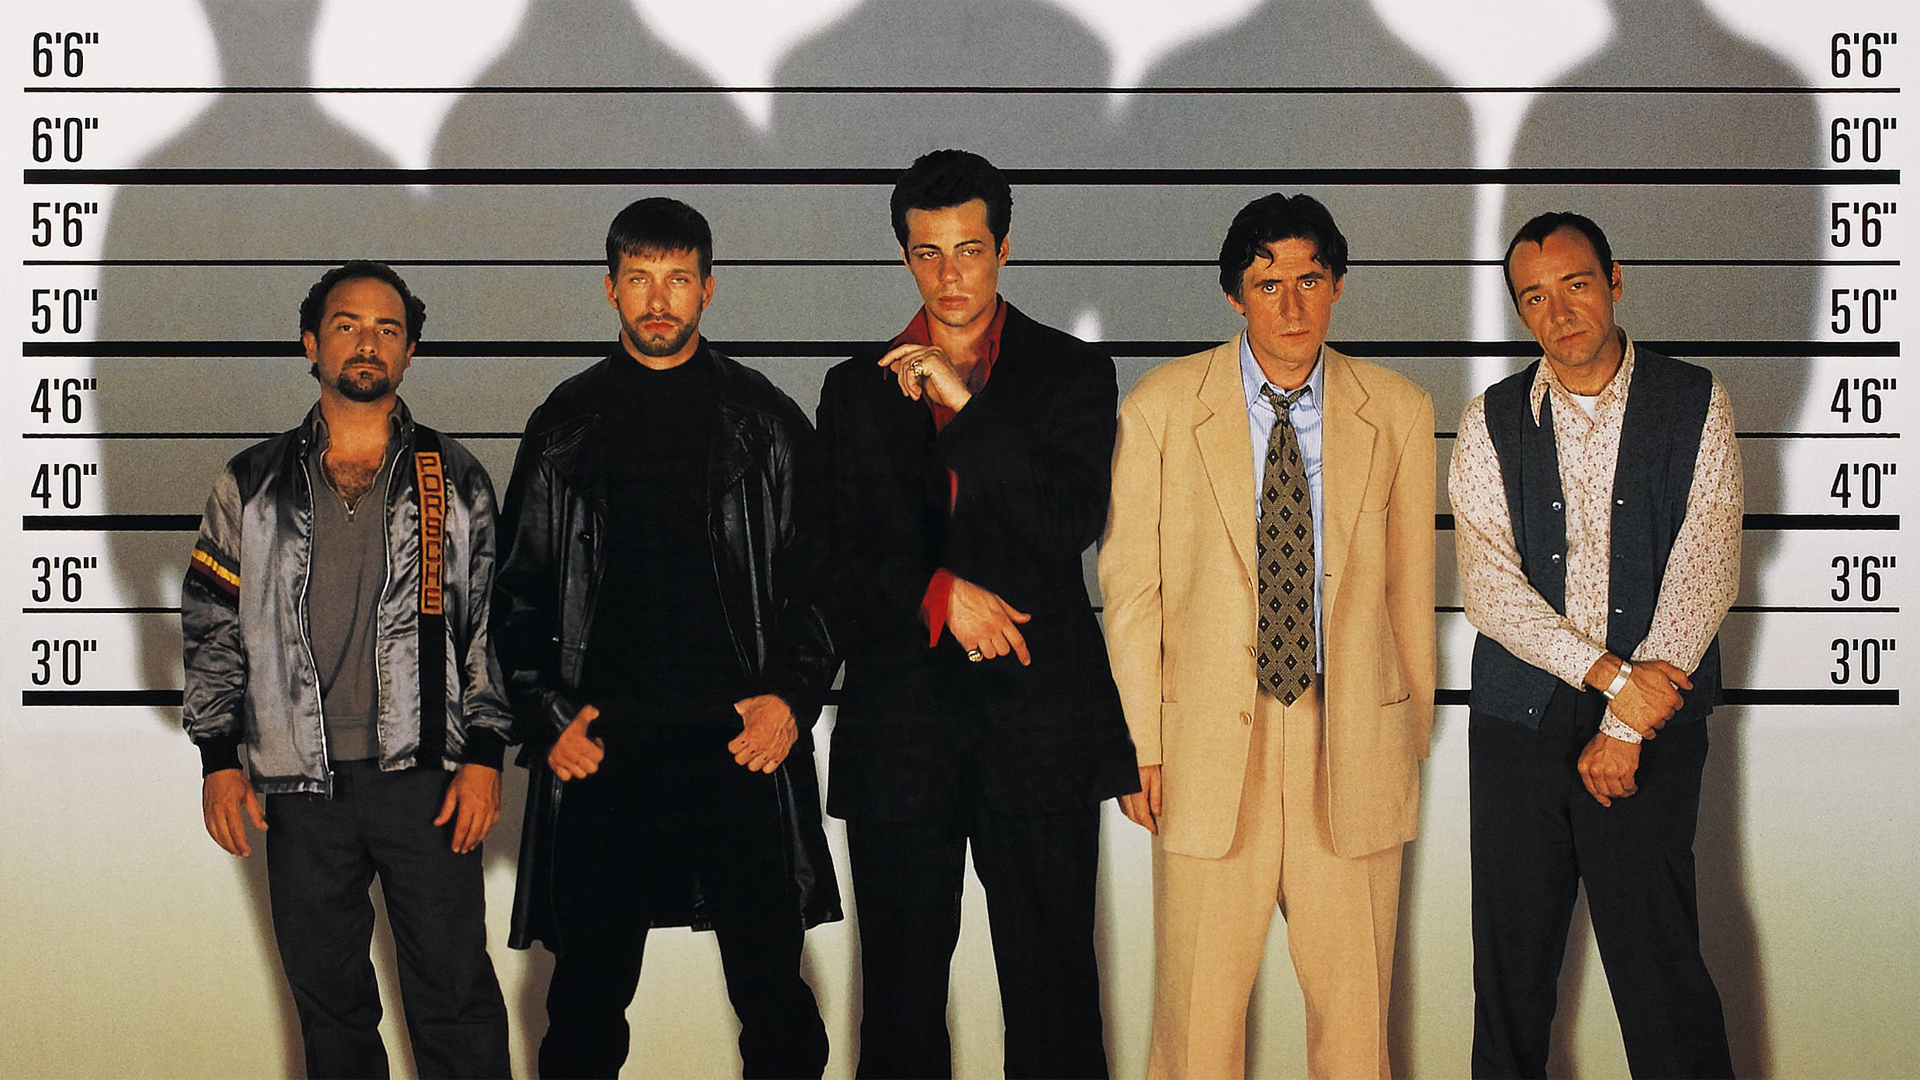 Movie The Usual Suspects HD Wallpaper